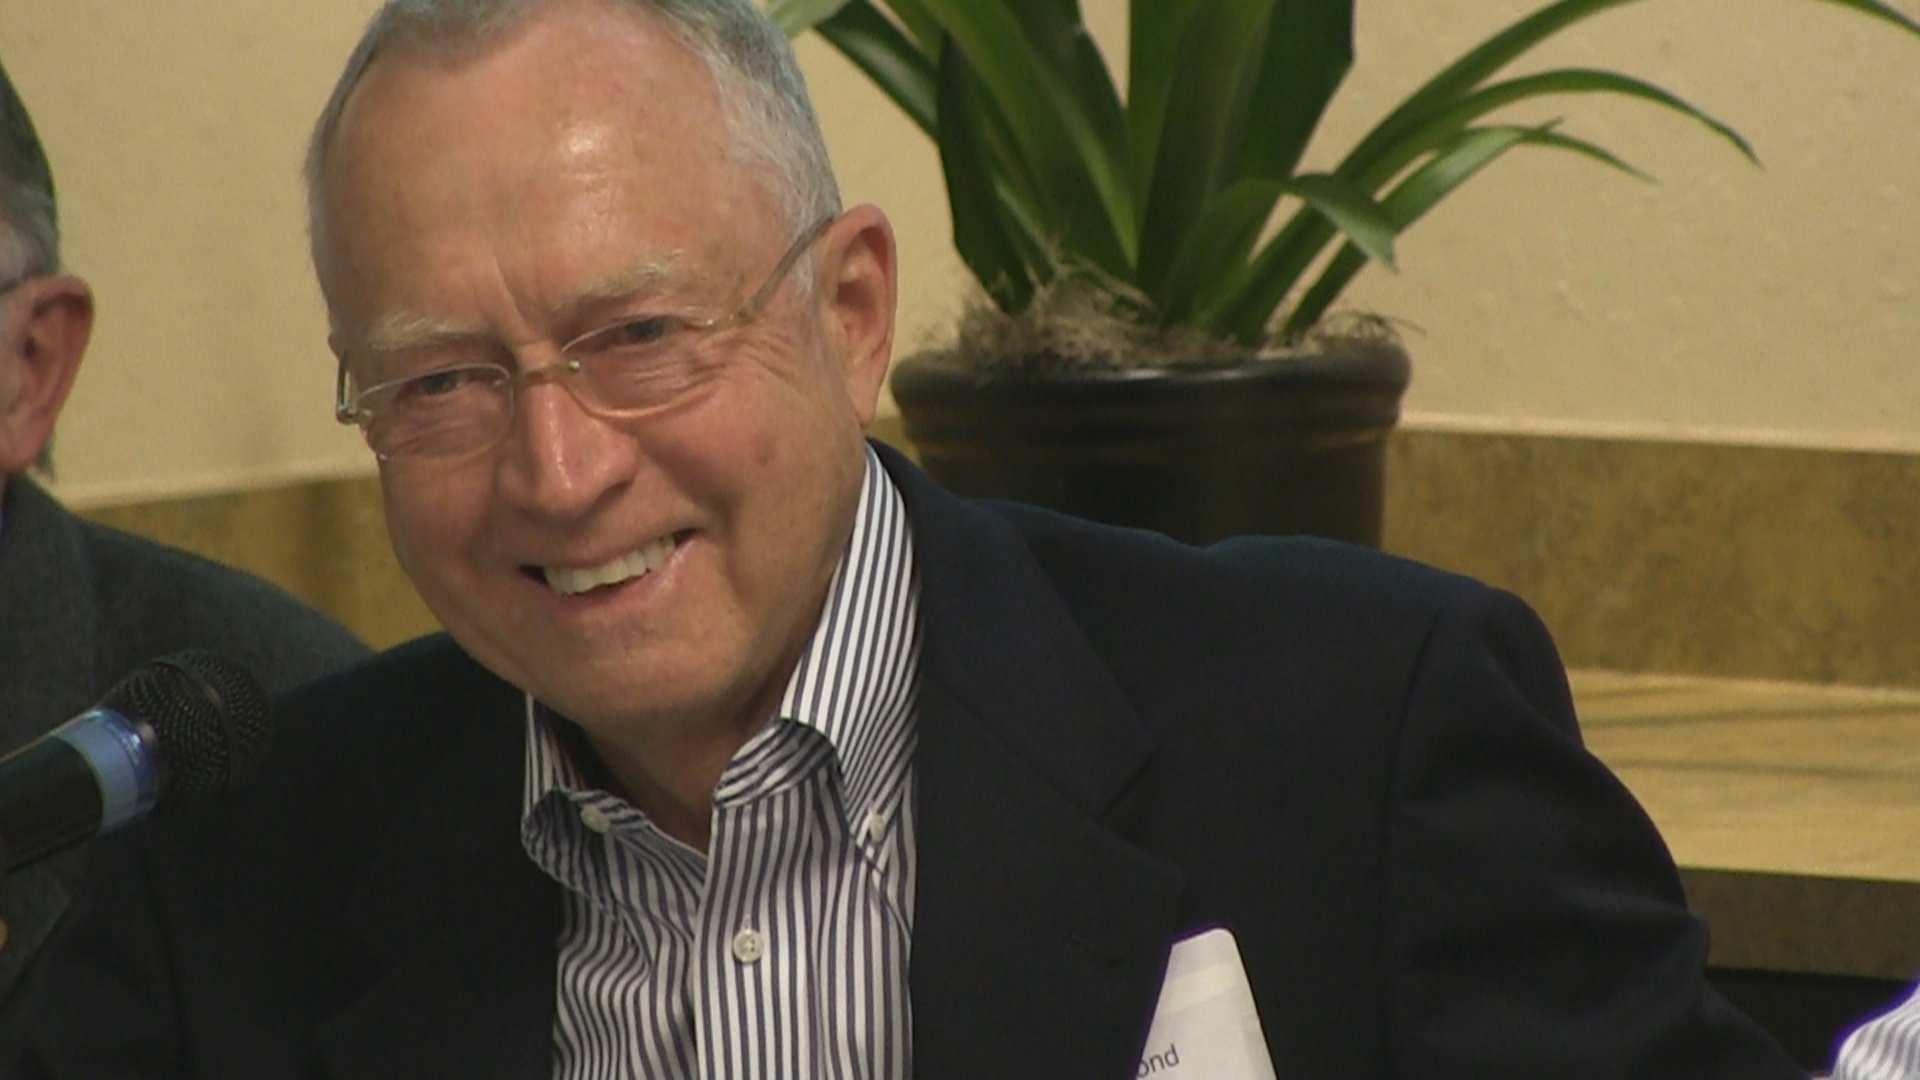 Norm Pond talks about what led him to Silicon Valley in the 1950s.